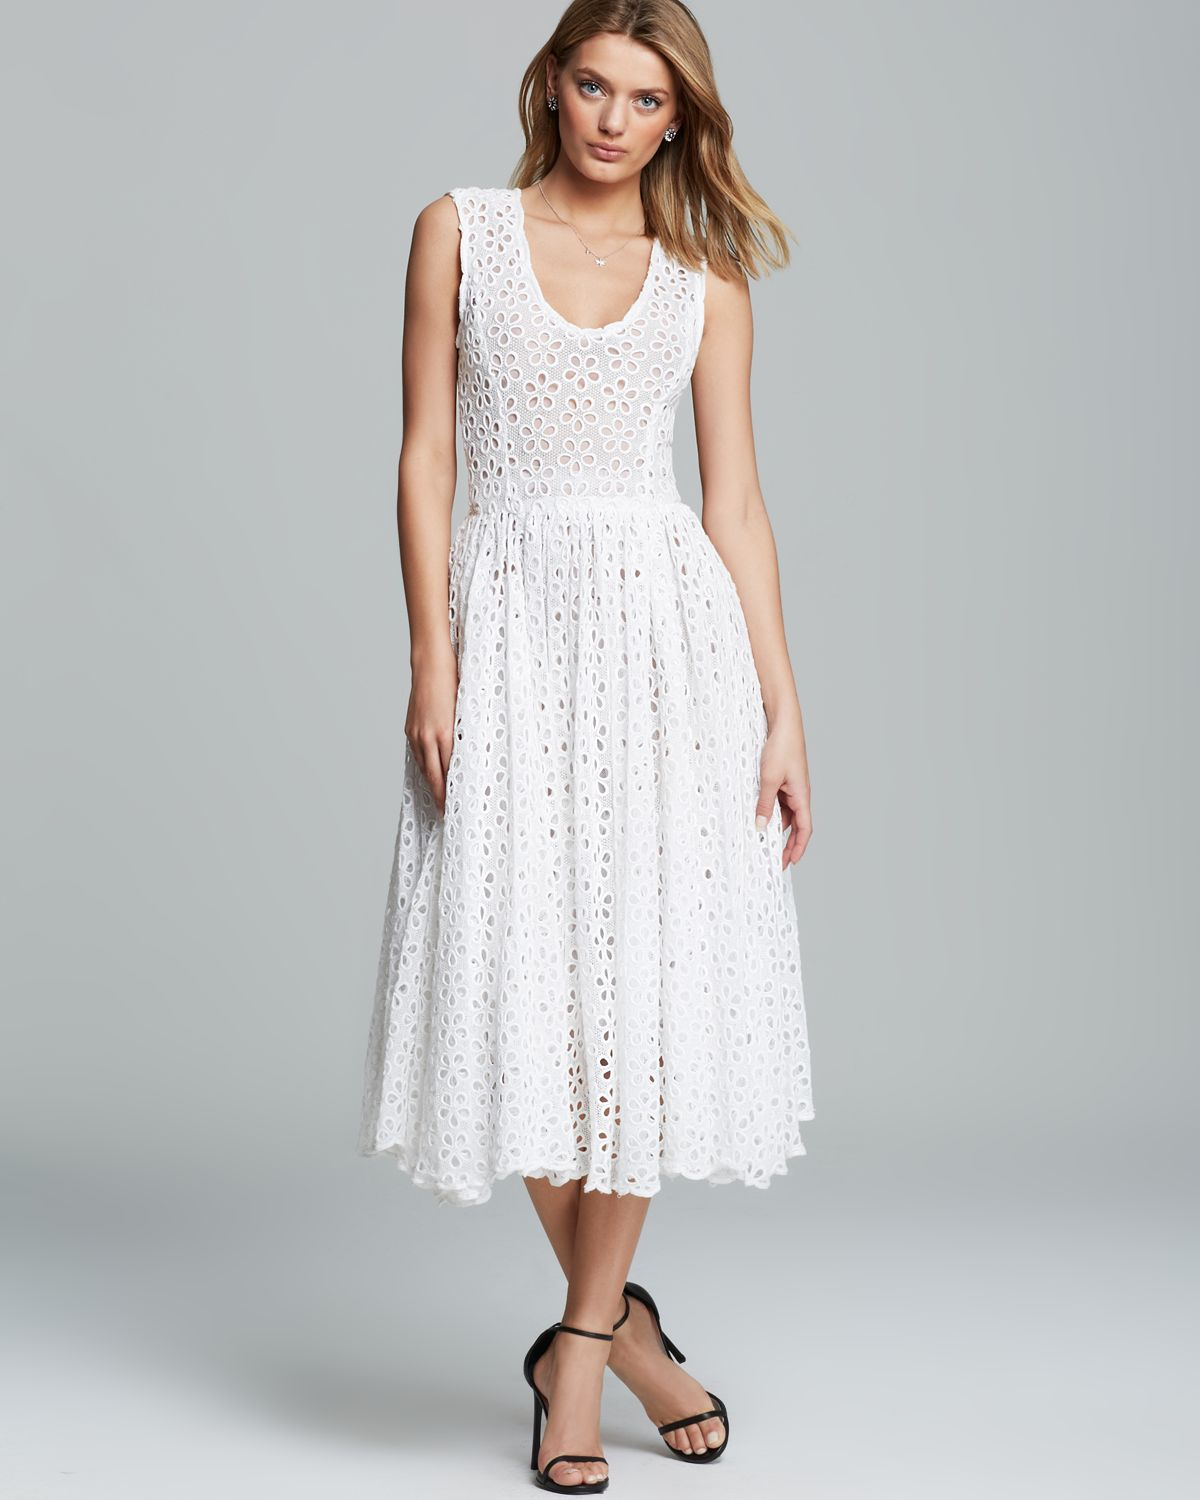 Lyst - Tracy Reese Dress Dolce Vida Embroidered Lace in White